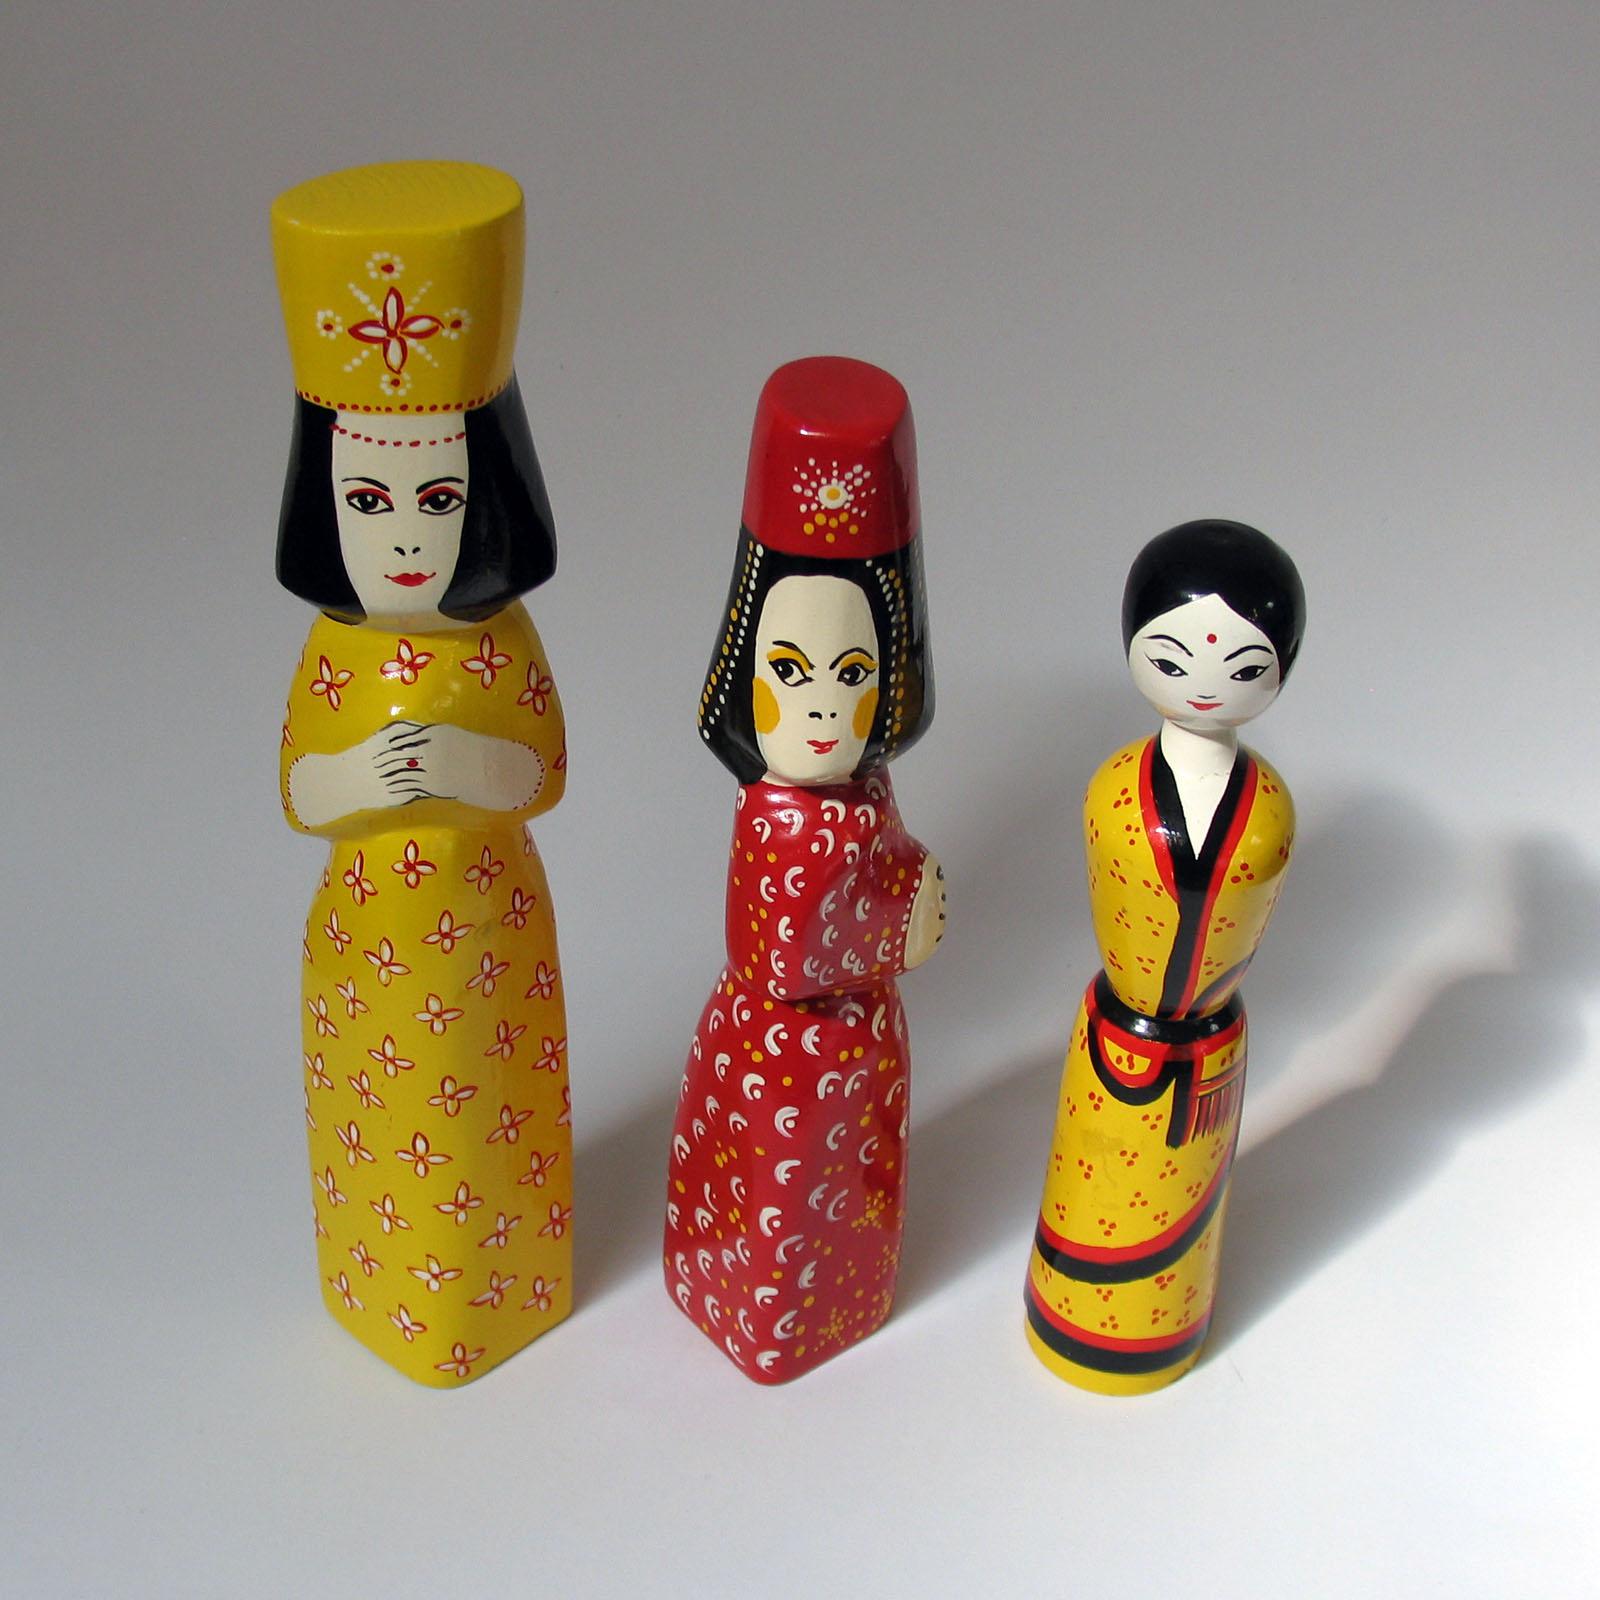 Hand-Carved Benedicte Bergmann Wooden Dolls part of the Mythological Sisters Series, 1969 For Sale